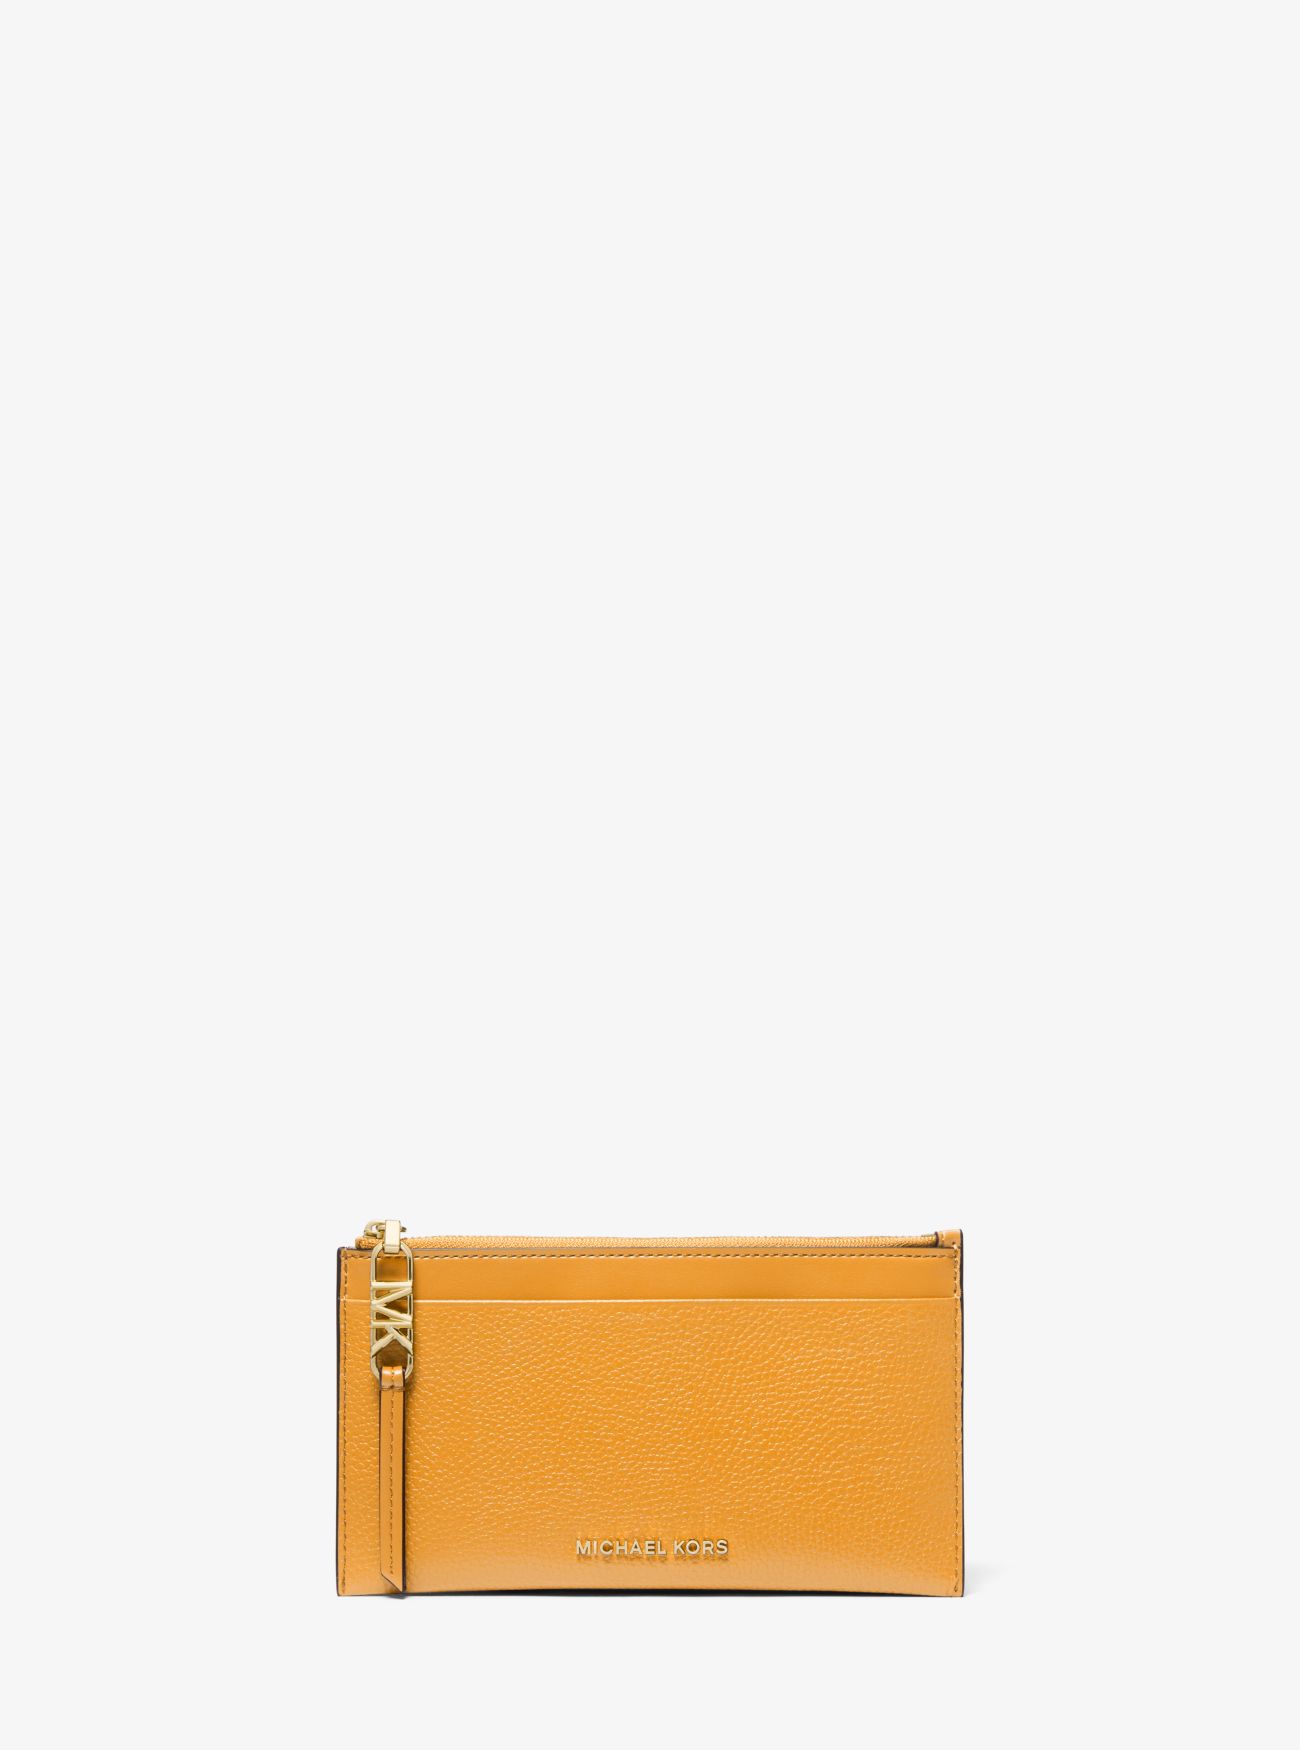 MK Empire Large Pebbled Leather Card Case - Yellow - Michael Kors